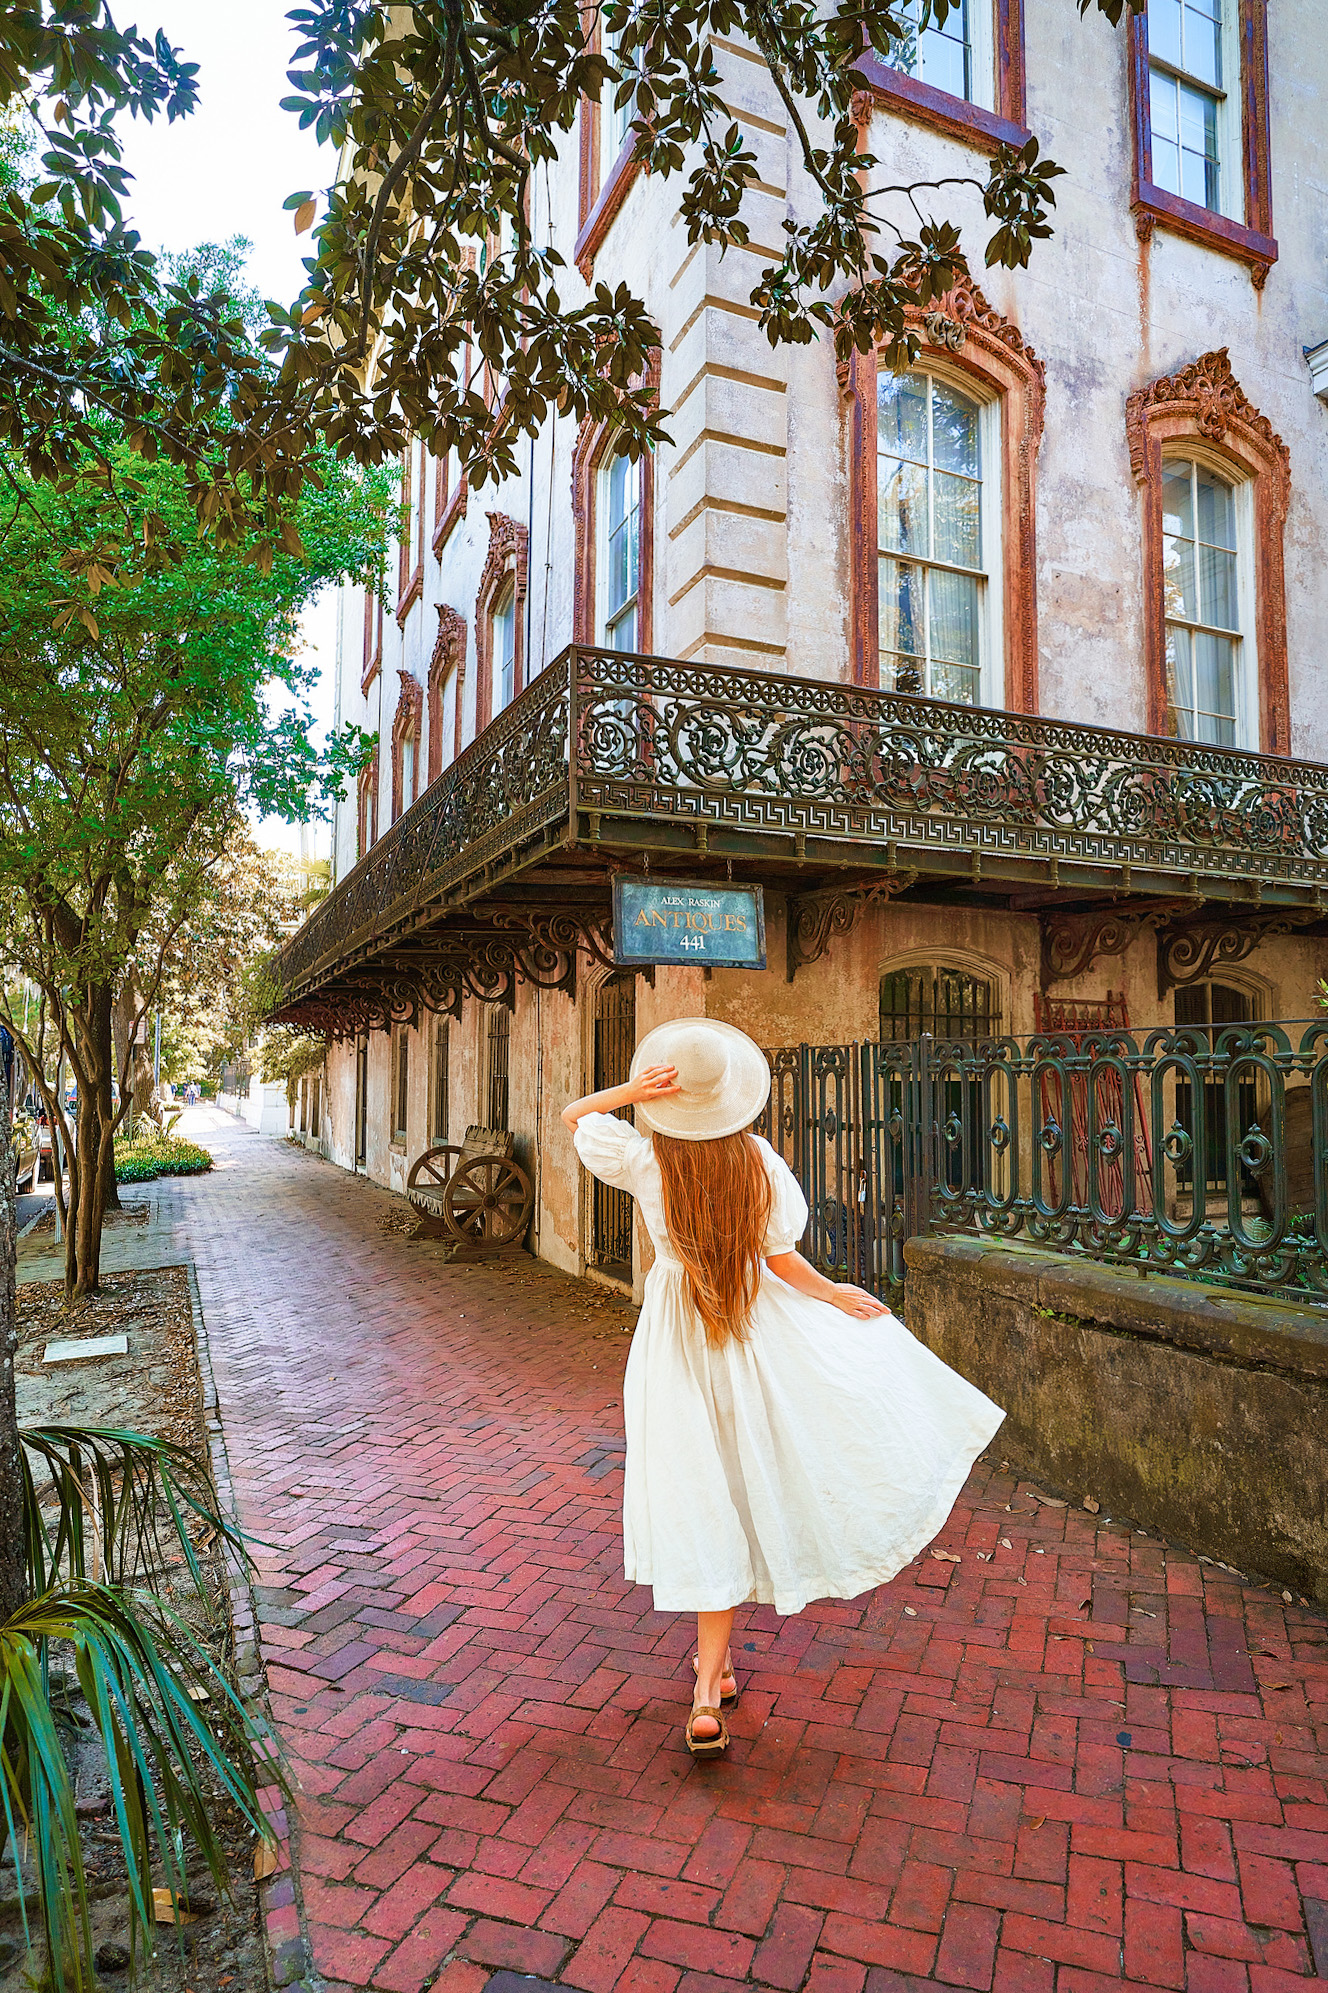 A woman in a white sundress with long hair and a white sunhat standing outside of a run down mansion. She is standing on a brick sidewalk looking up at the building. The building has stained plaster, rusted window trimmings, and a rusted wrought iron balcony and gate.